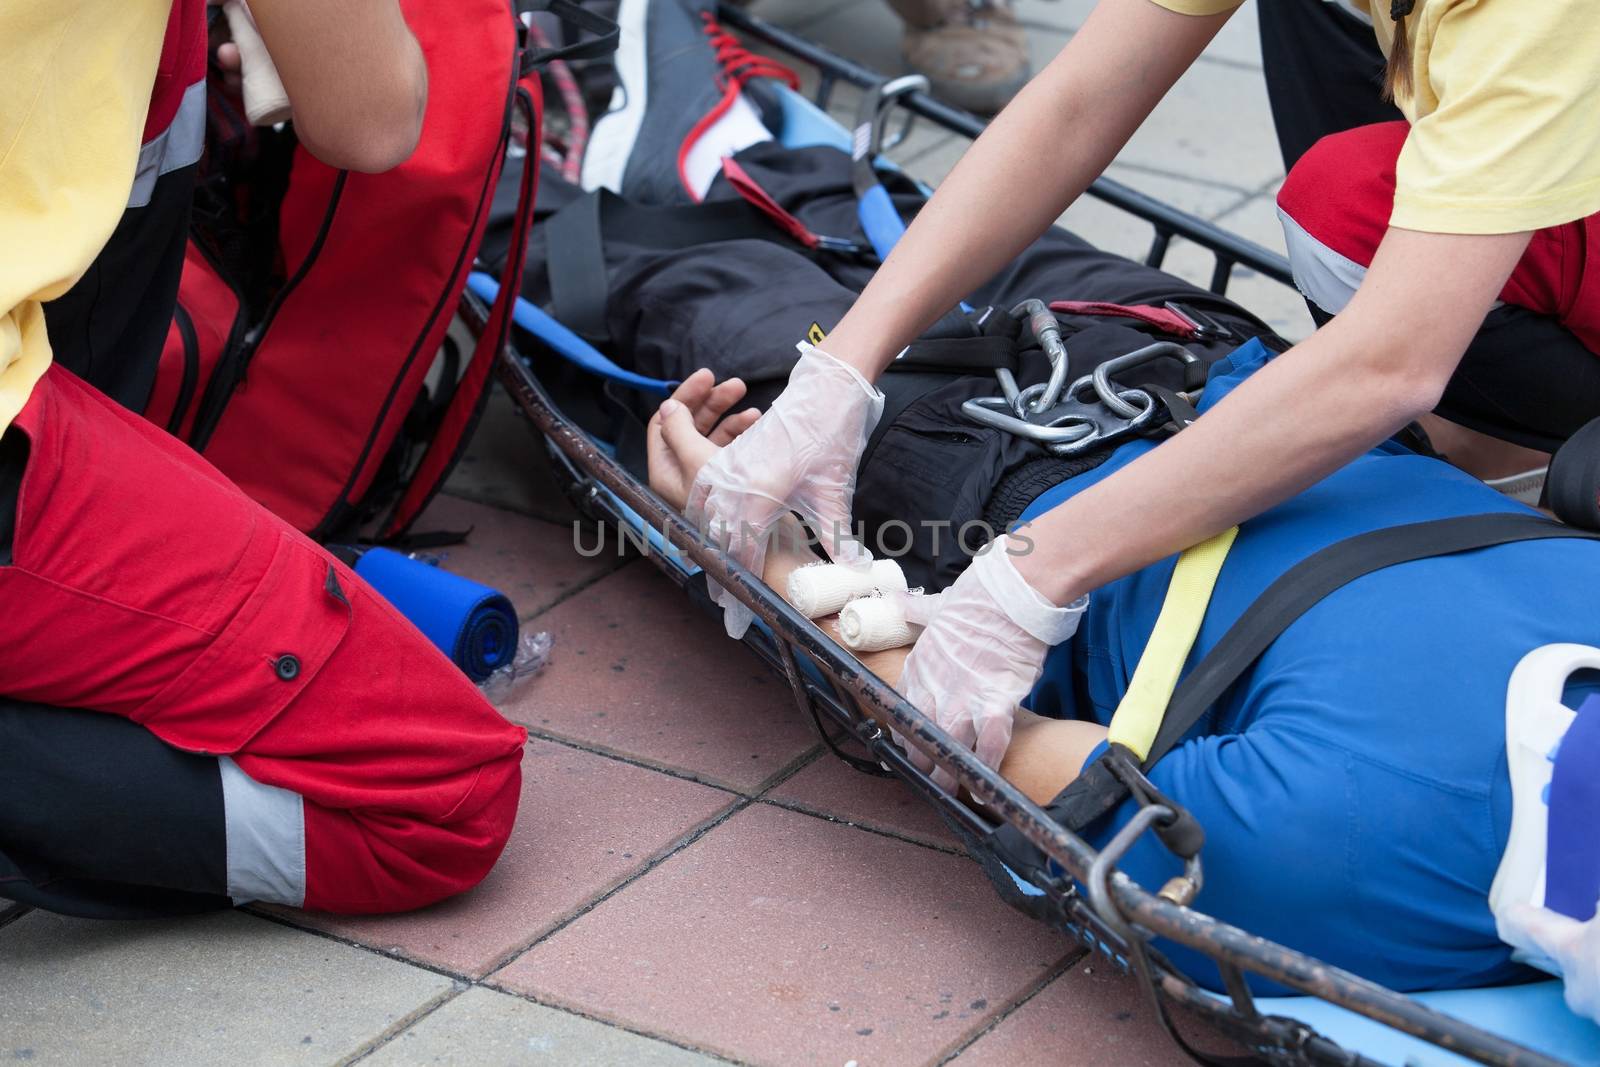 First aid training detail by wellphoto